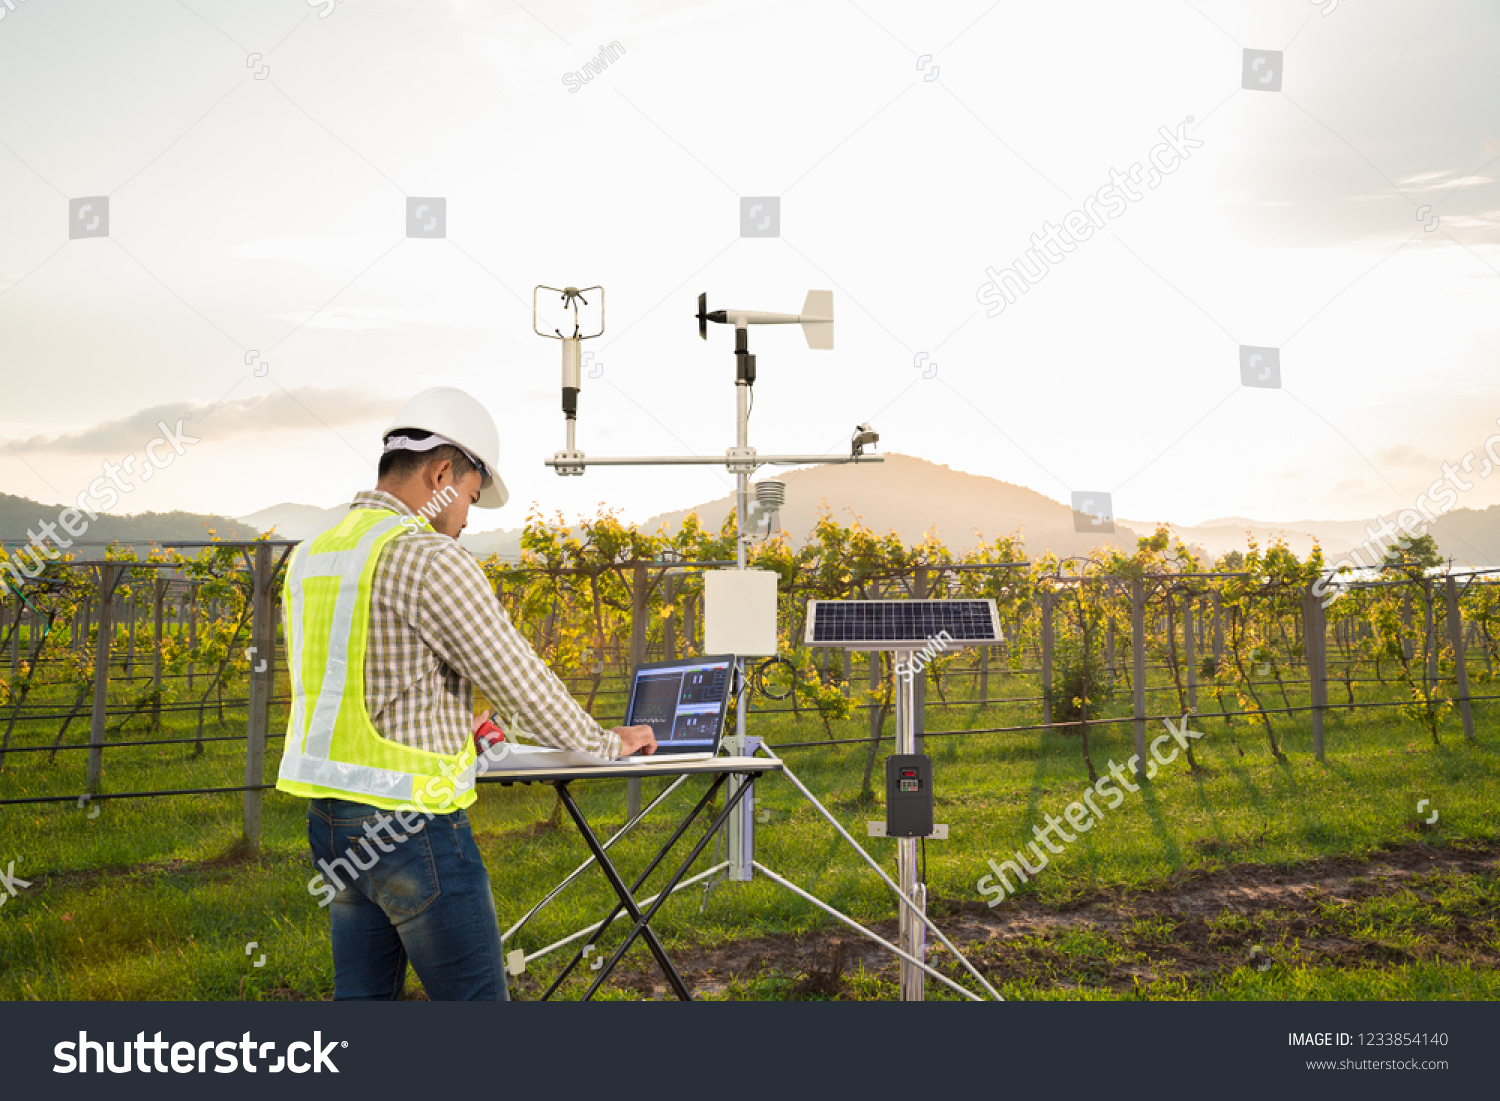 Agronomist using tablet computer collect data with meteorological instrument to measure the wind speed, temperature and humidity and solar cell system in grape agricultural field, Smart farm concept #1233854140